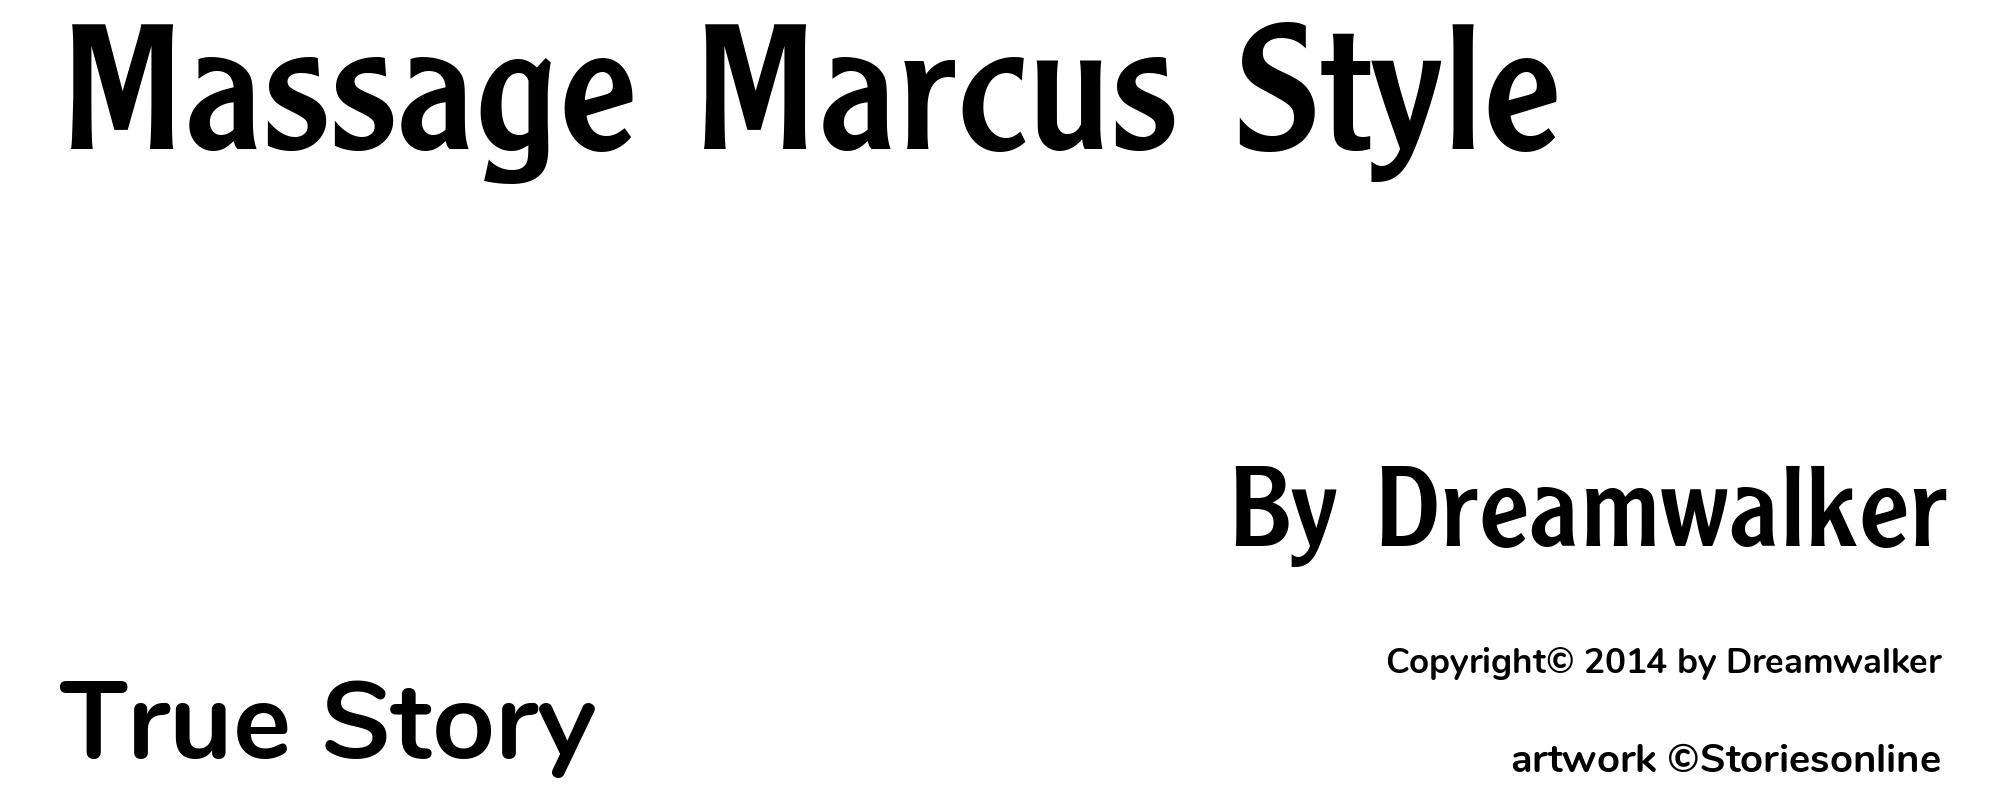 Massage Marcus Style  - Cover